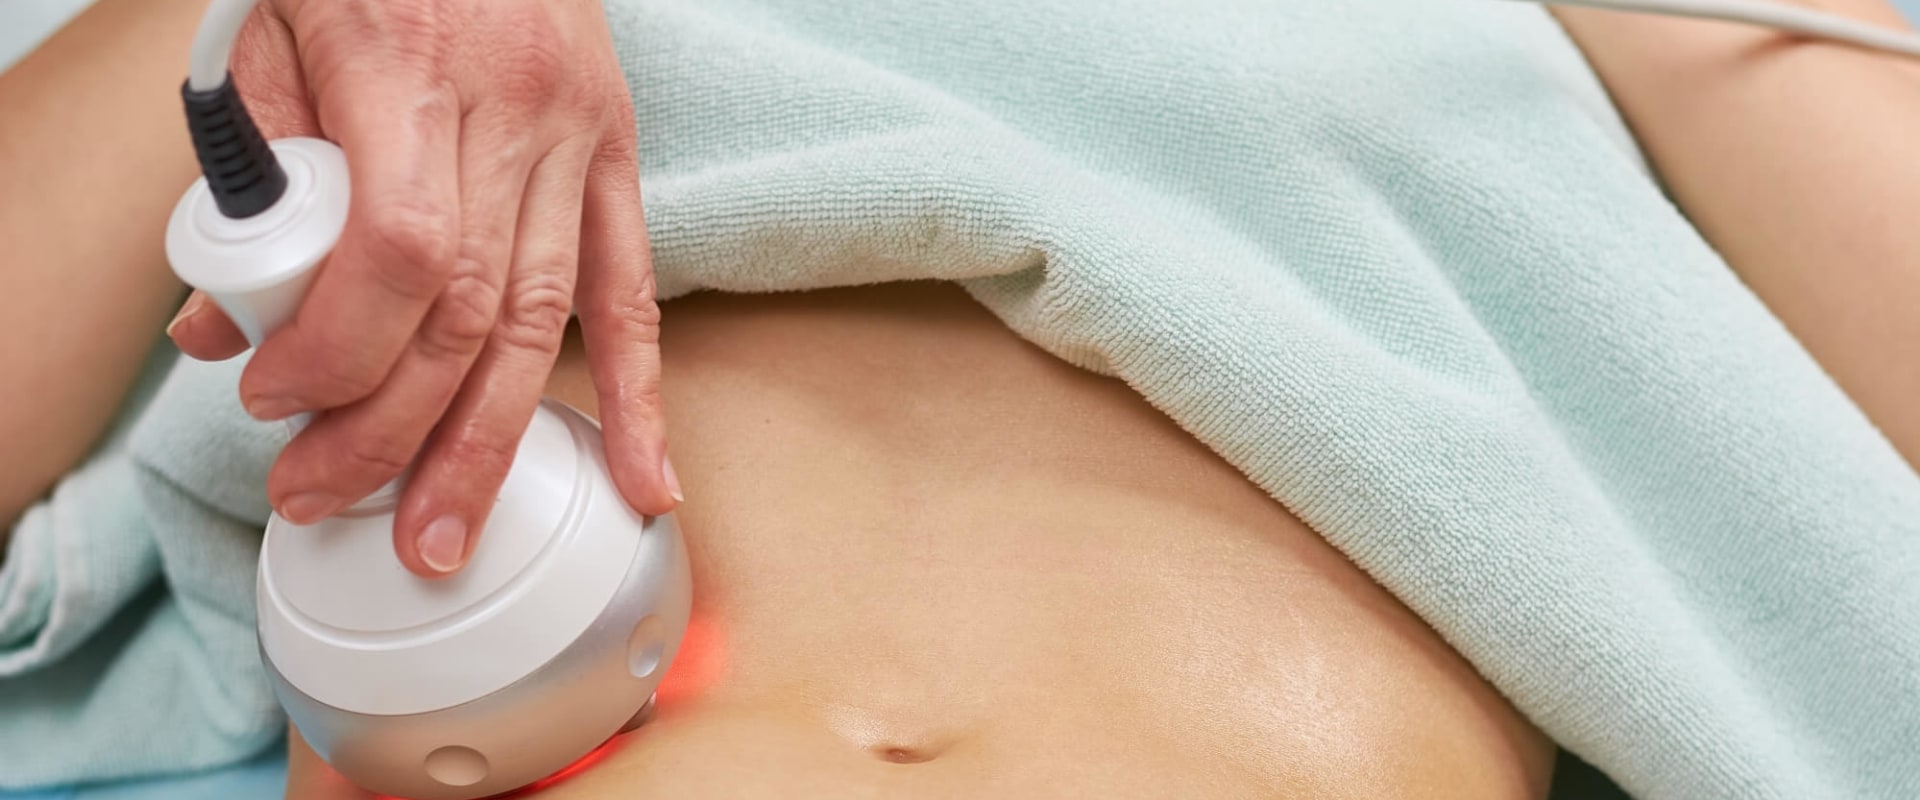 Does Non-Surgical Fat Removal Really Work?